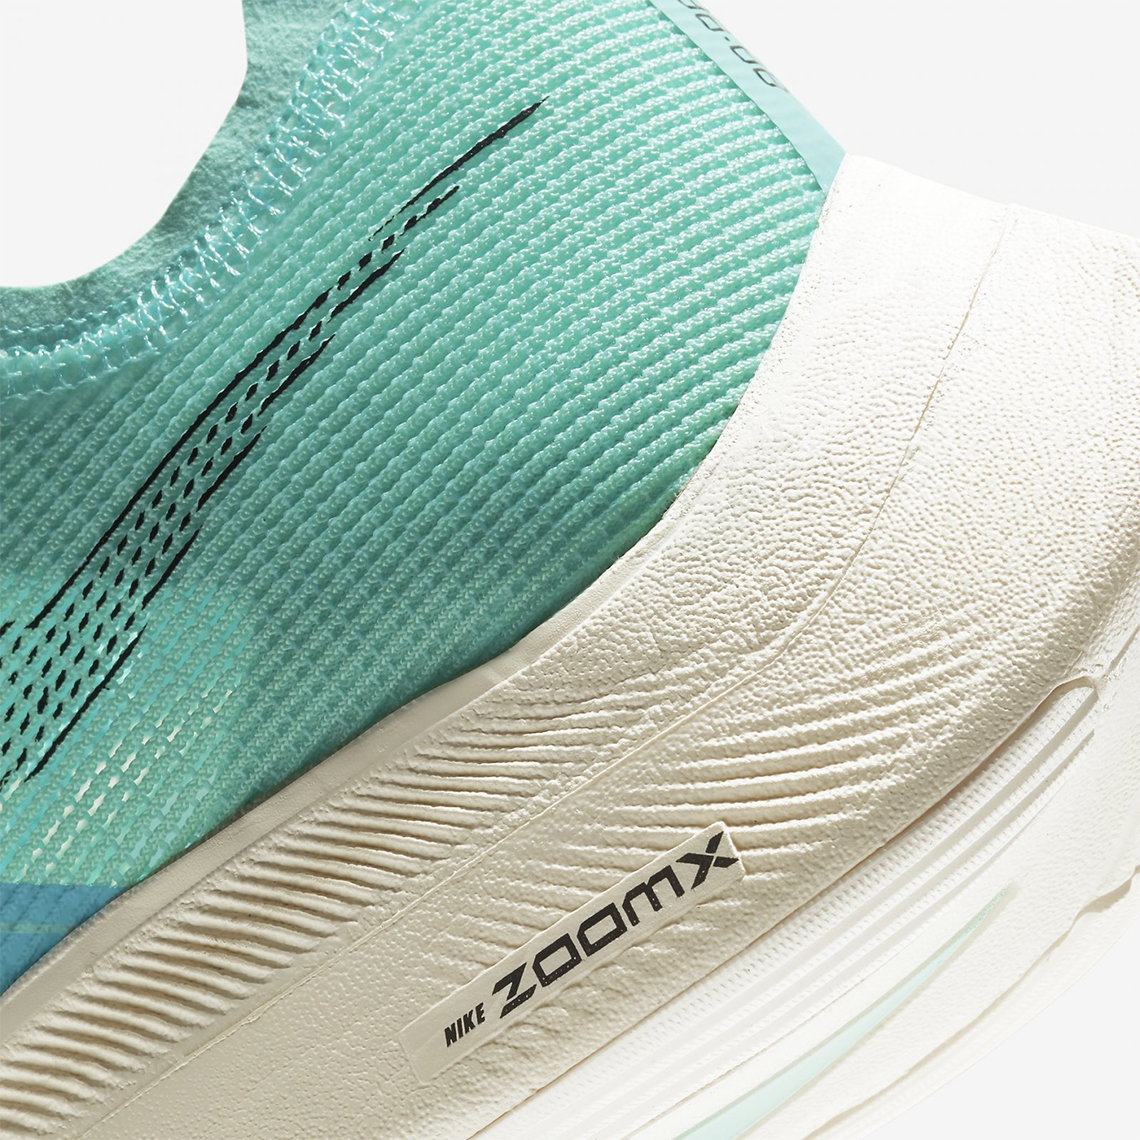 Nike Zoom Vaporfly Next Percent 2 2021 Release Date 8